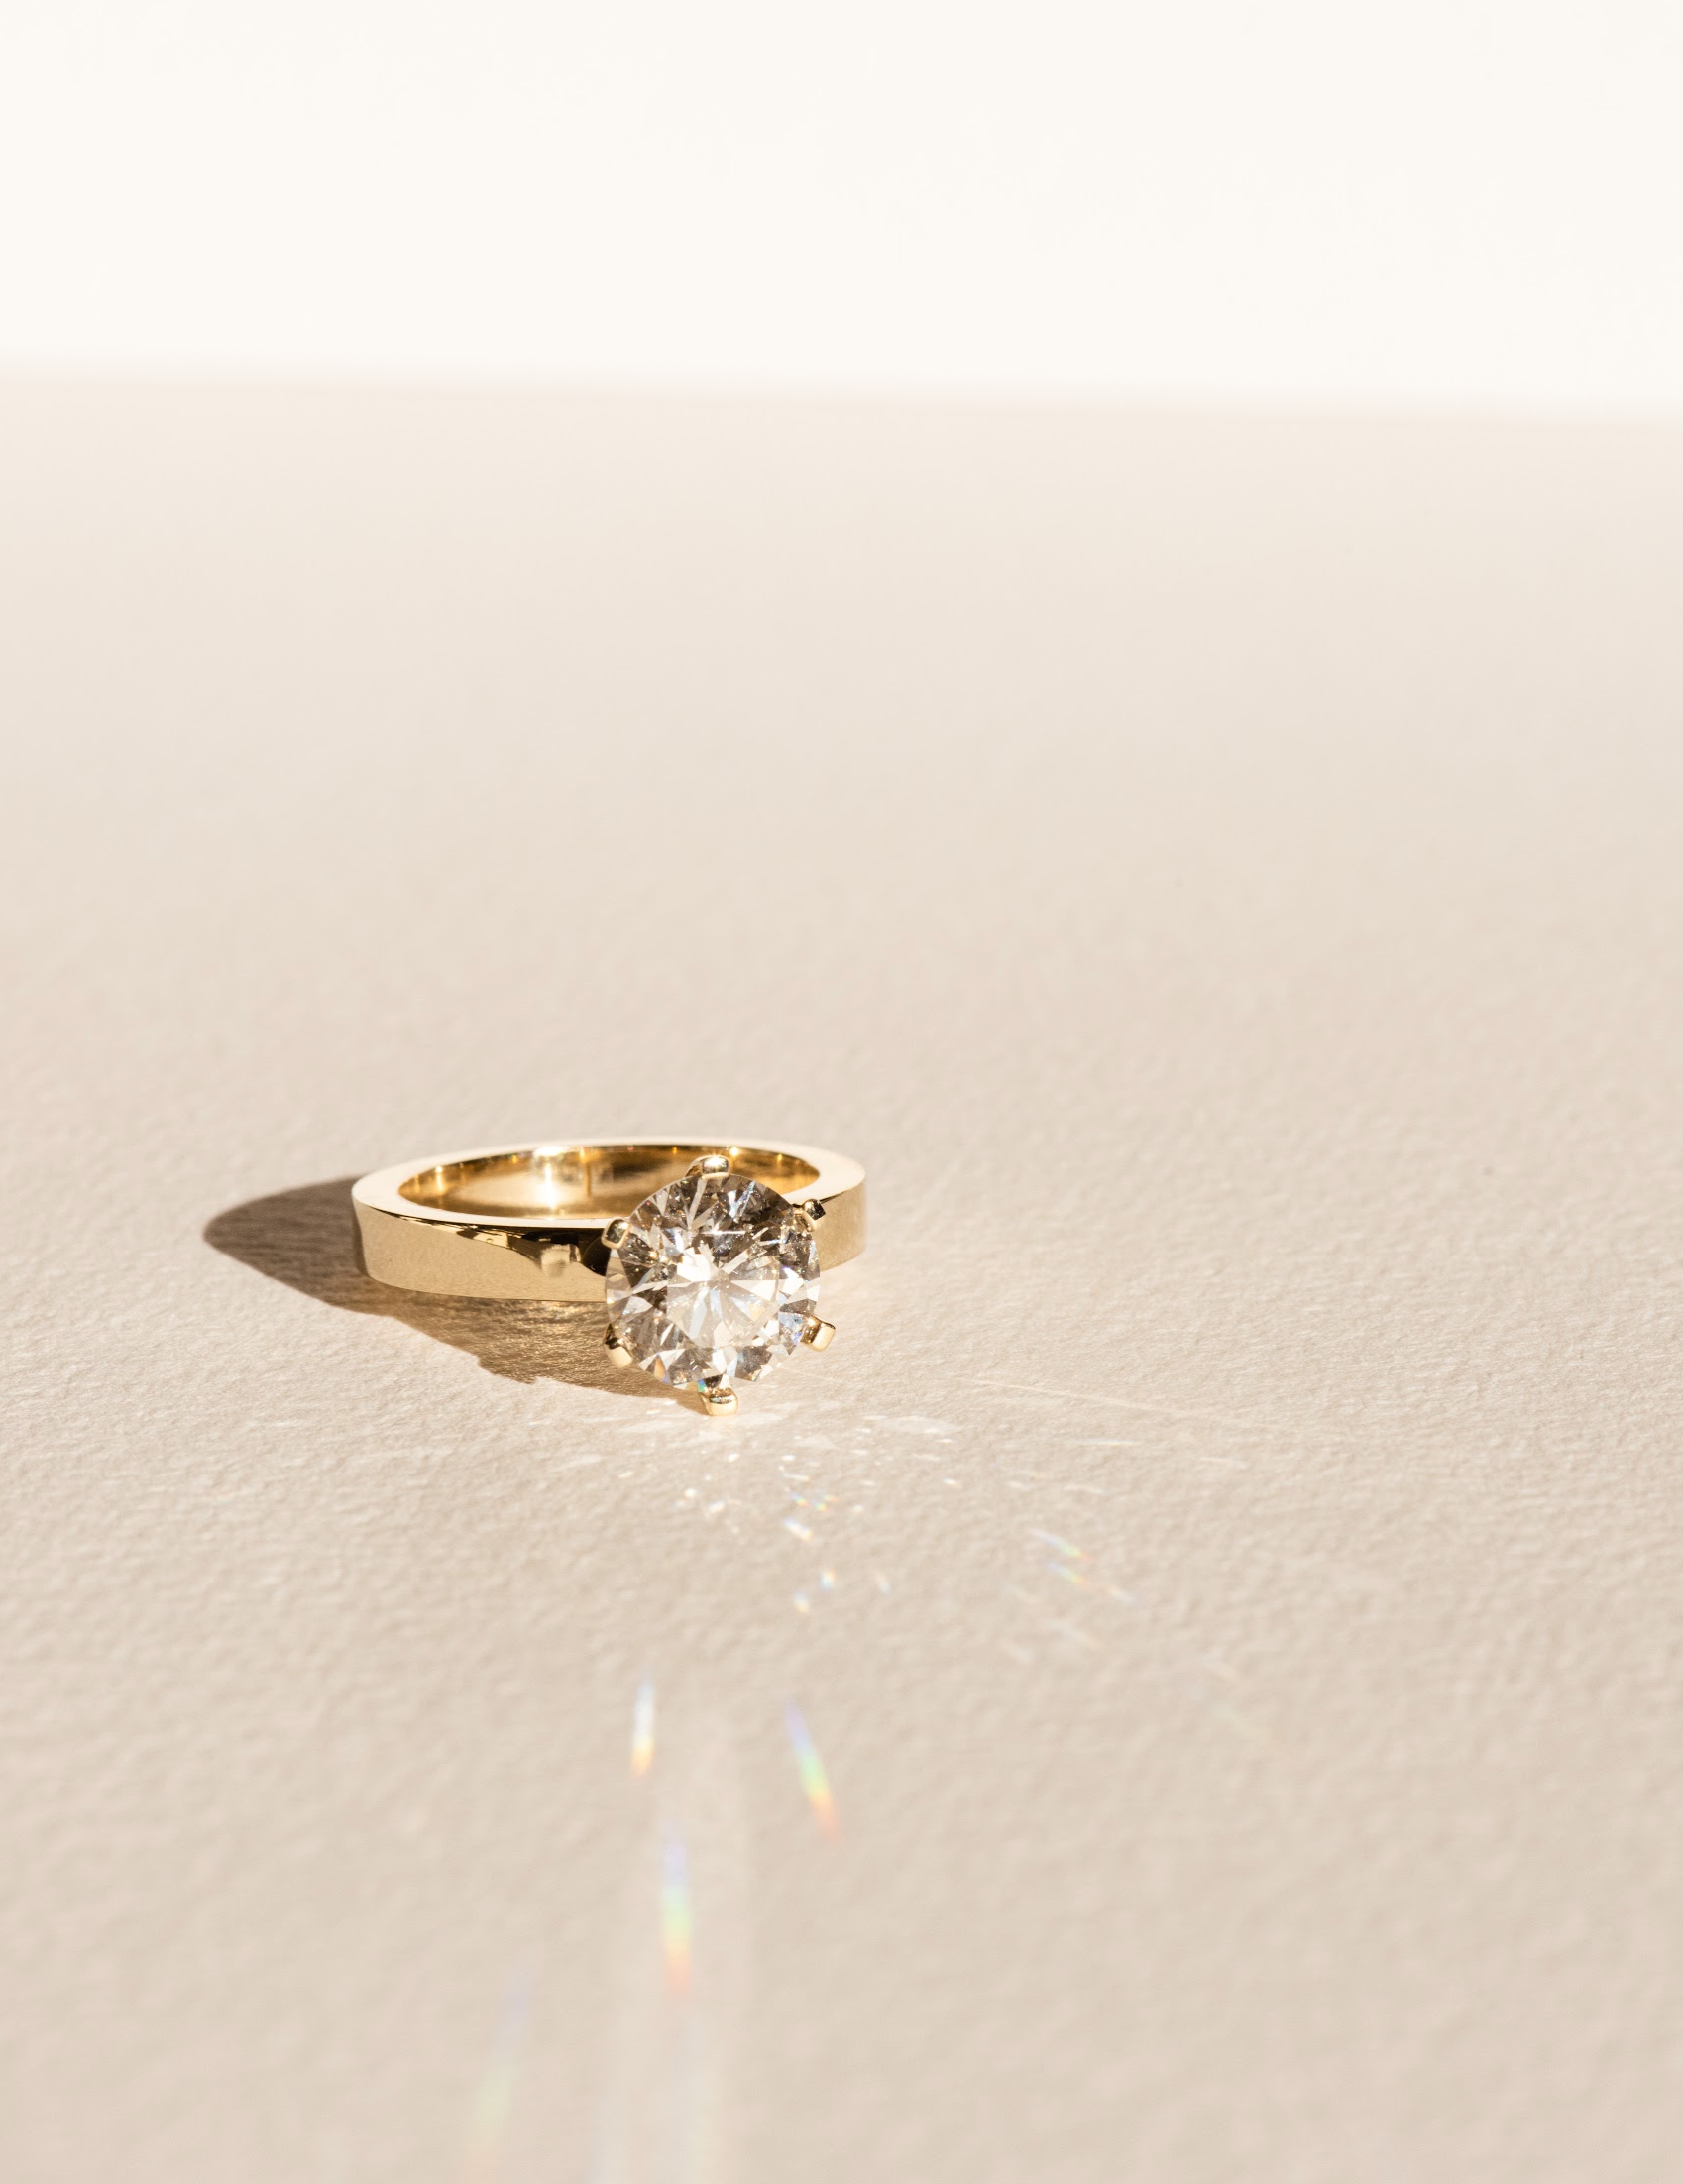 Solitaire Engagement Ring - Bespoke Design - Dean & Dust - Six Claw - Round Diamond